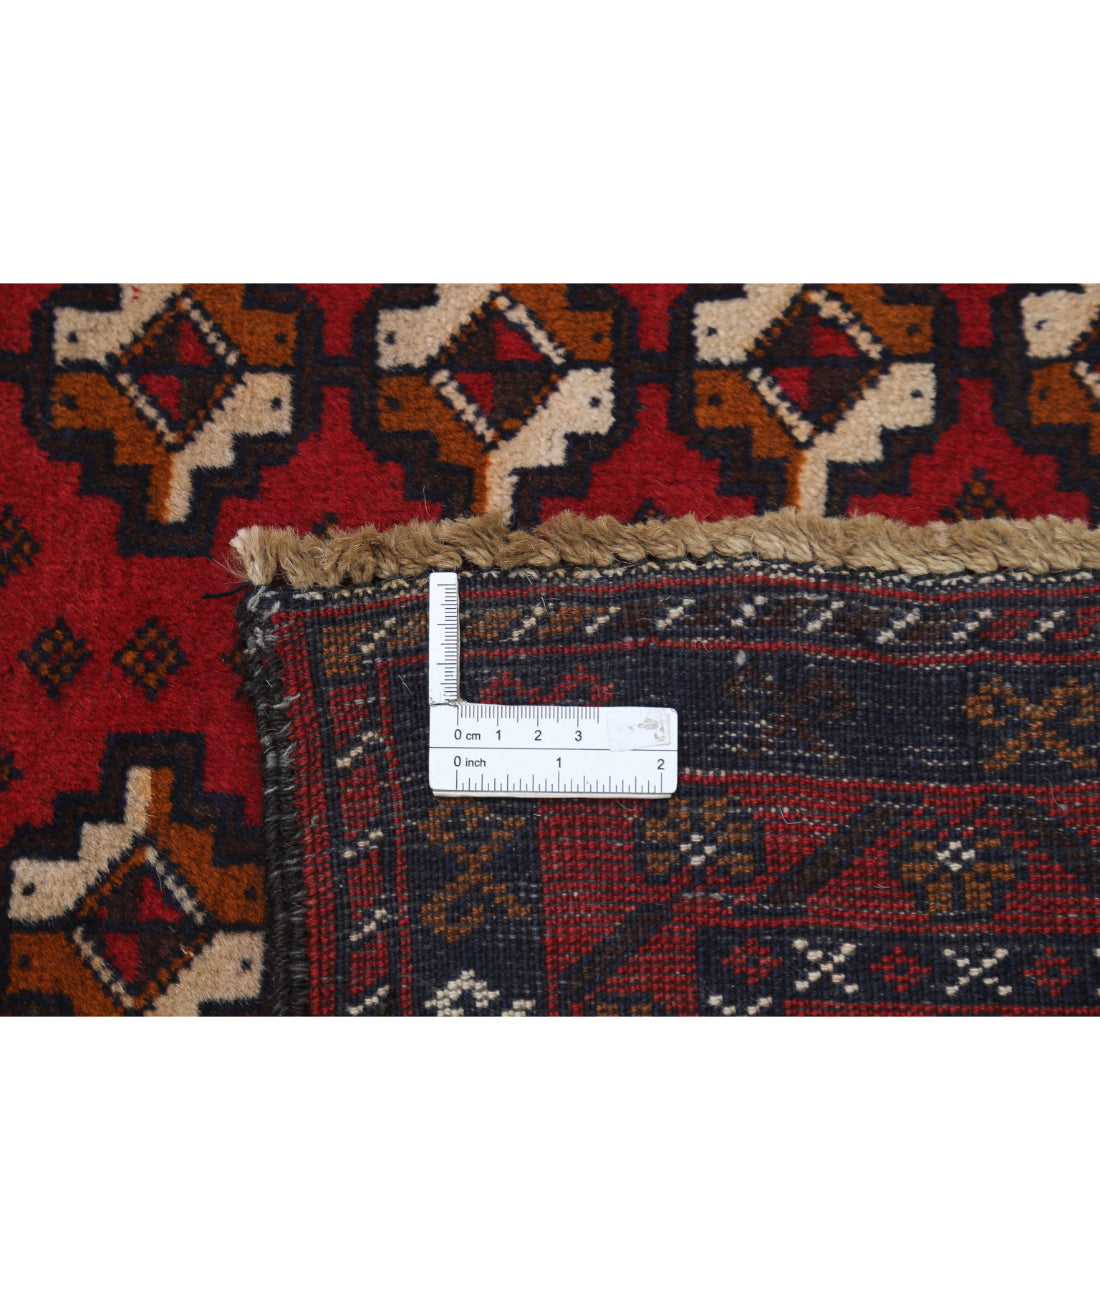 Baluch 2'10'' X 4'6'' Hand-Knotted Wool Rug 2'10'' x 4'6'' (85 X 135) / Red / N/A